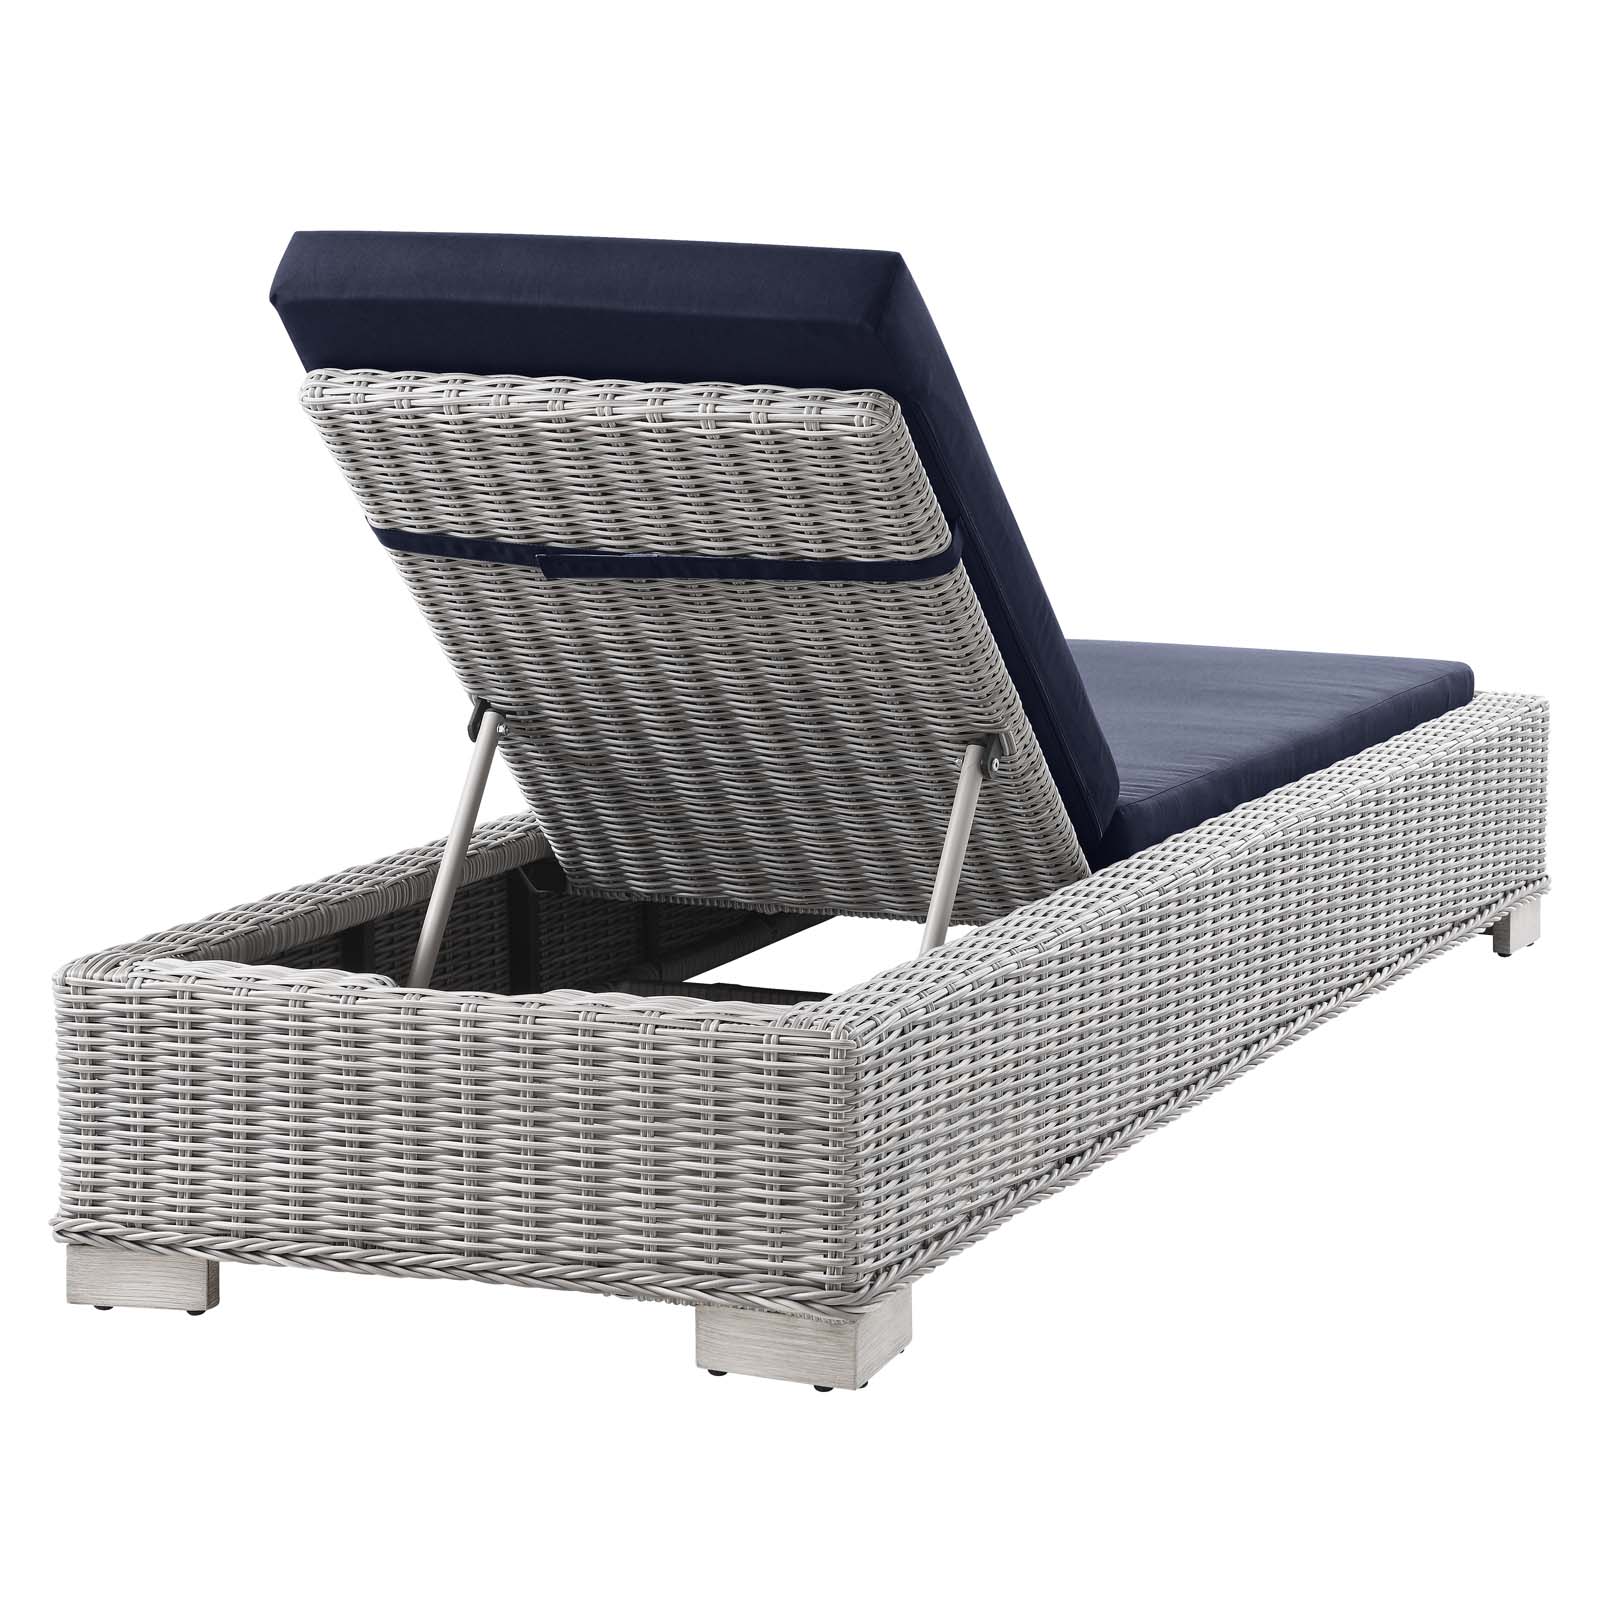 Modway Conway Outdoor Patio Wicker Rattan Chaise Lounge in Light Gray Navy - image 5 of 9